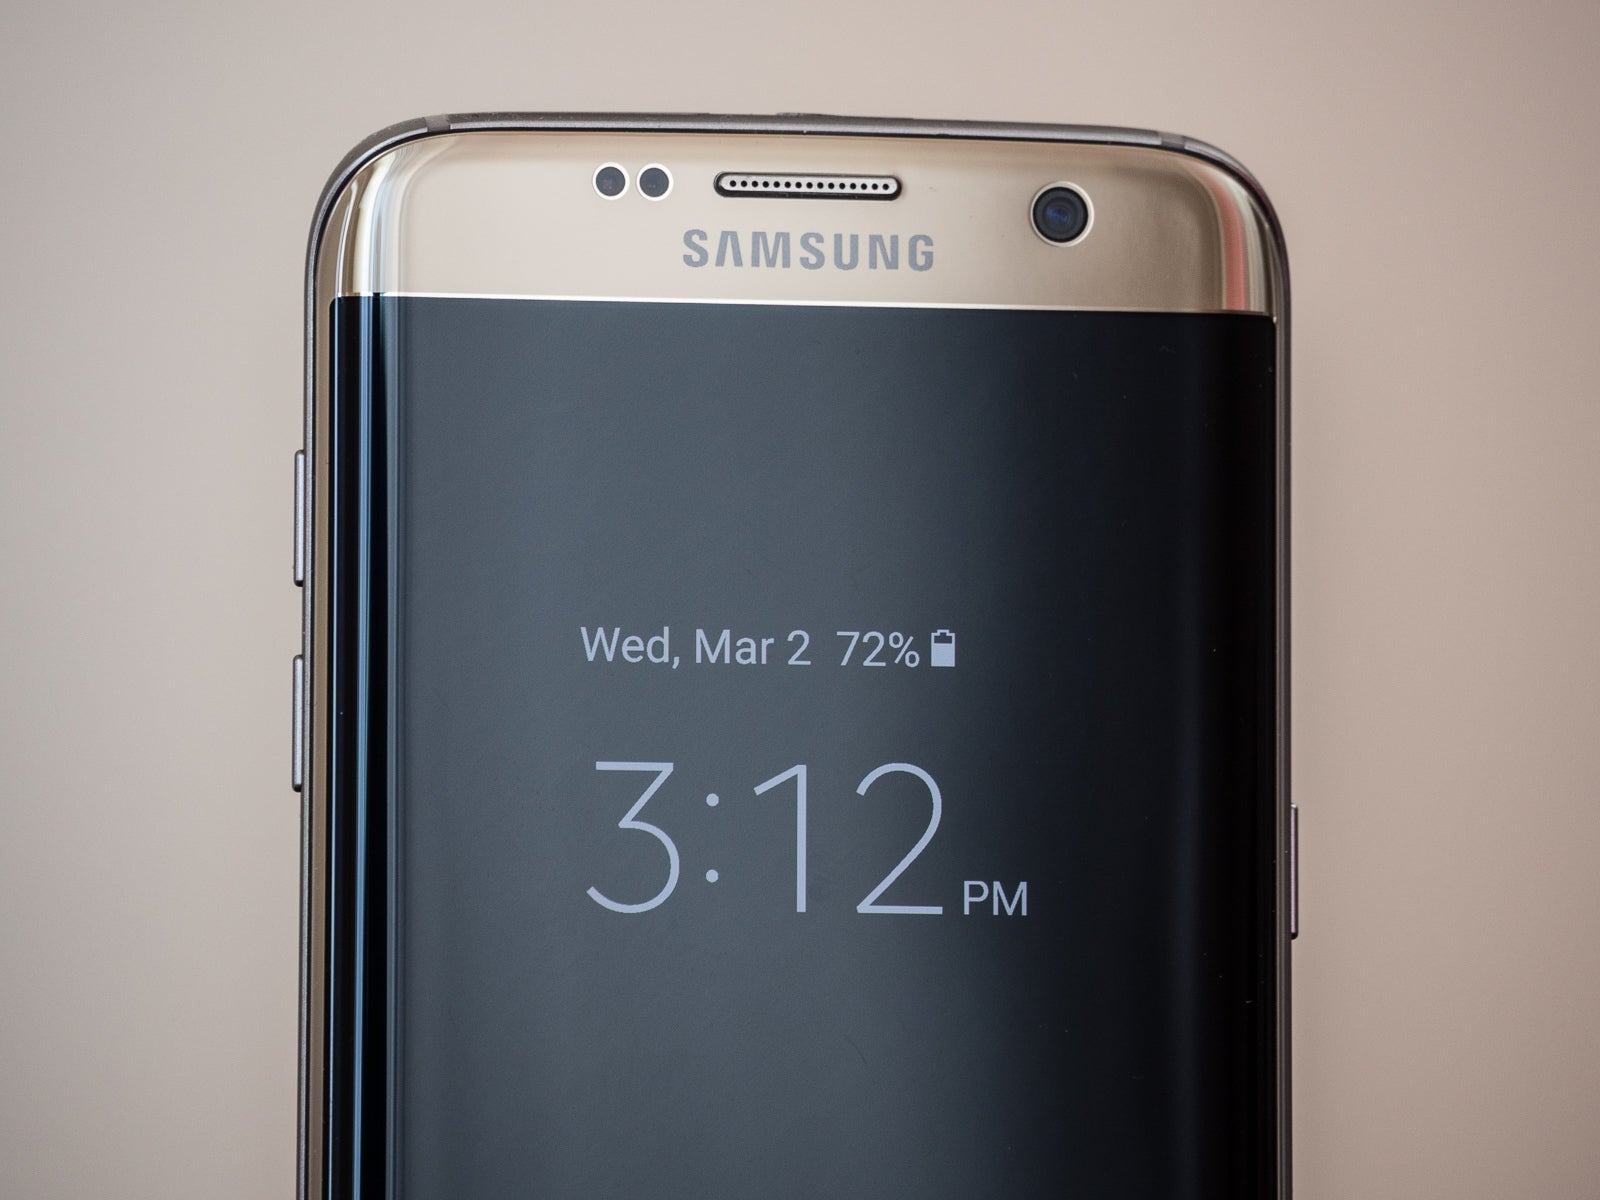 Samsung Galaxy S7 Edge: Revisiting the legend 5 years after its launch